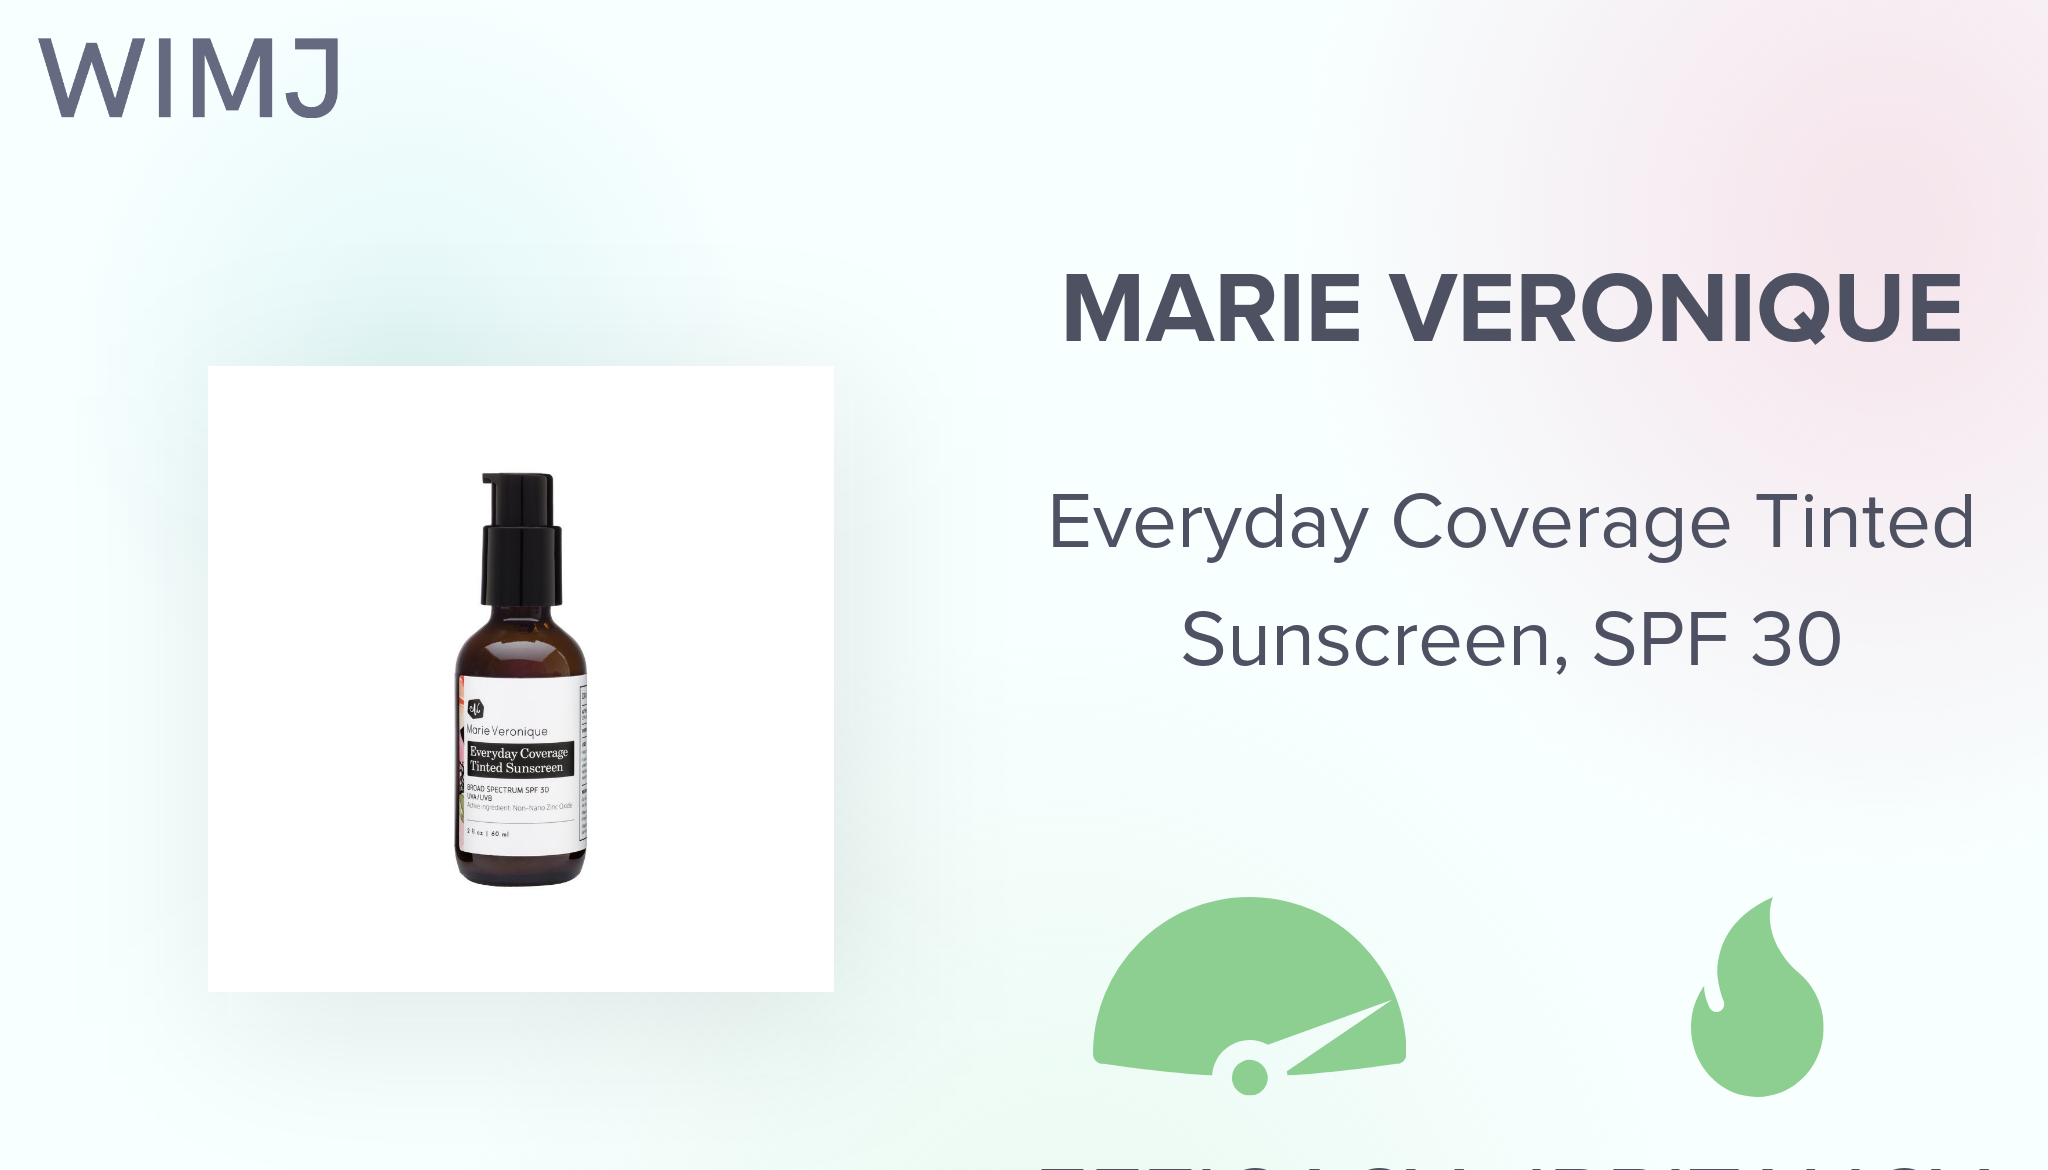 Review: marie veronique - Everyday Coverage Tinted Sunscreen, SPF 